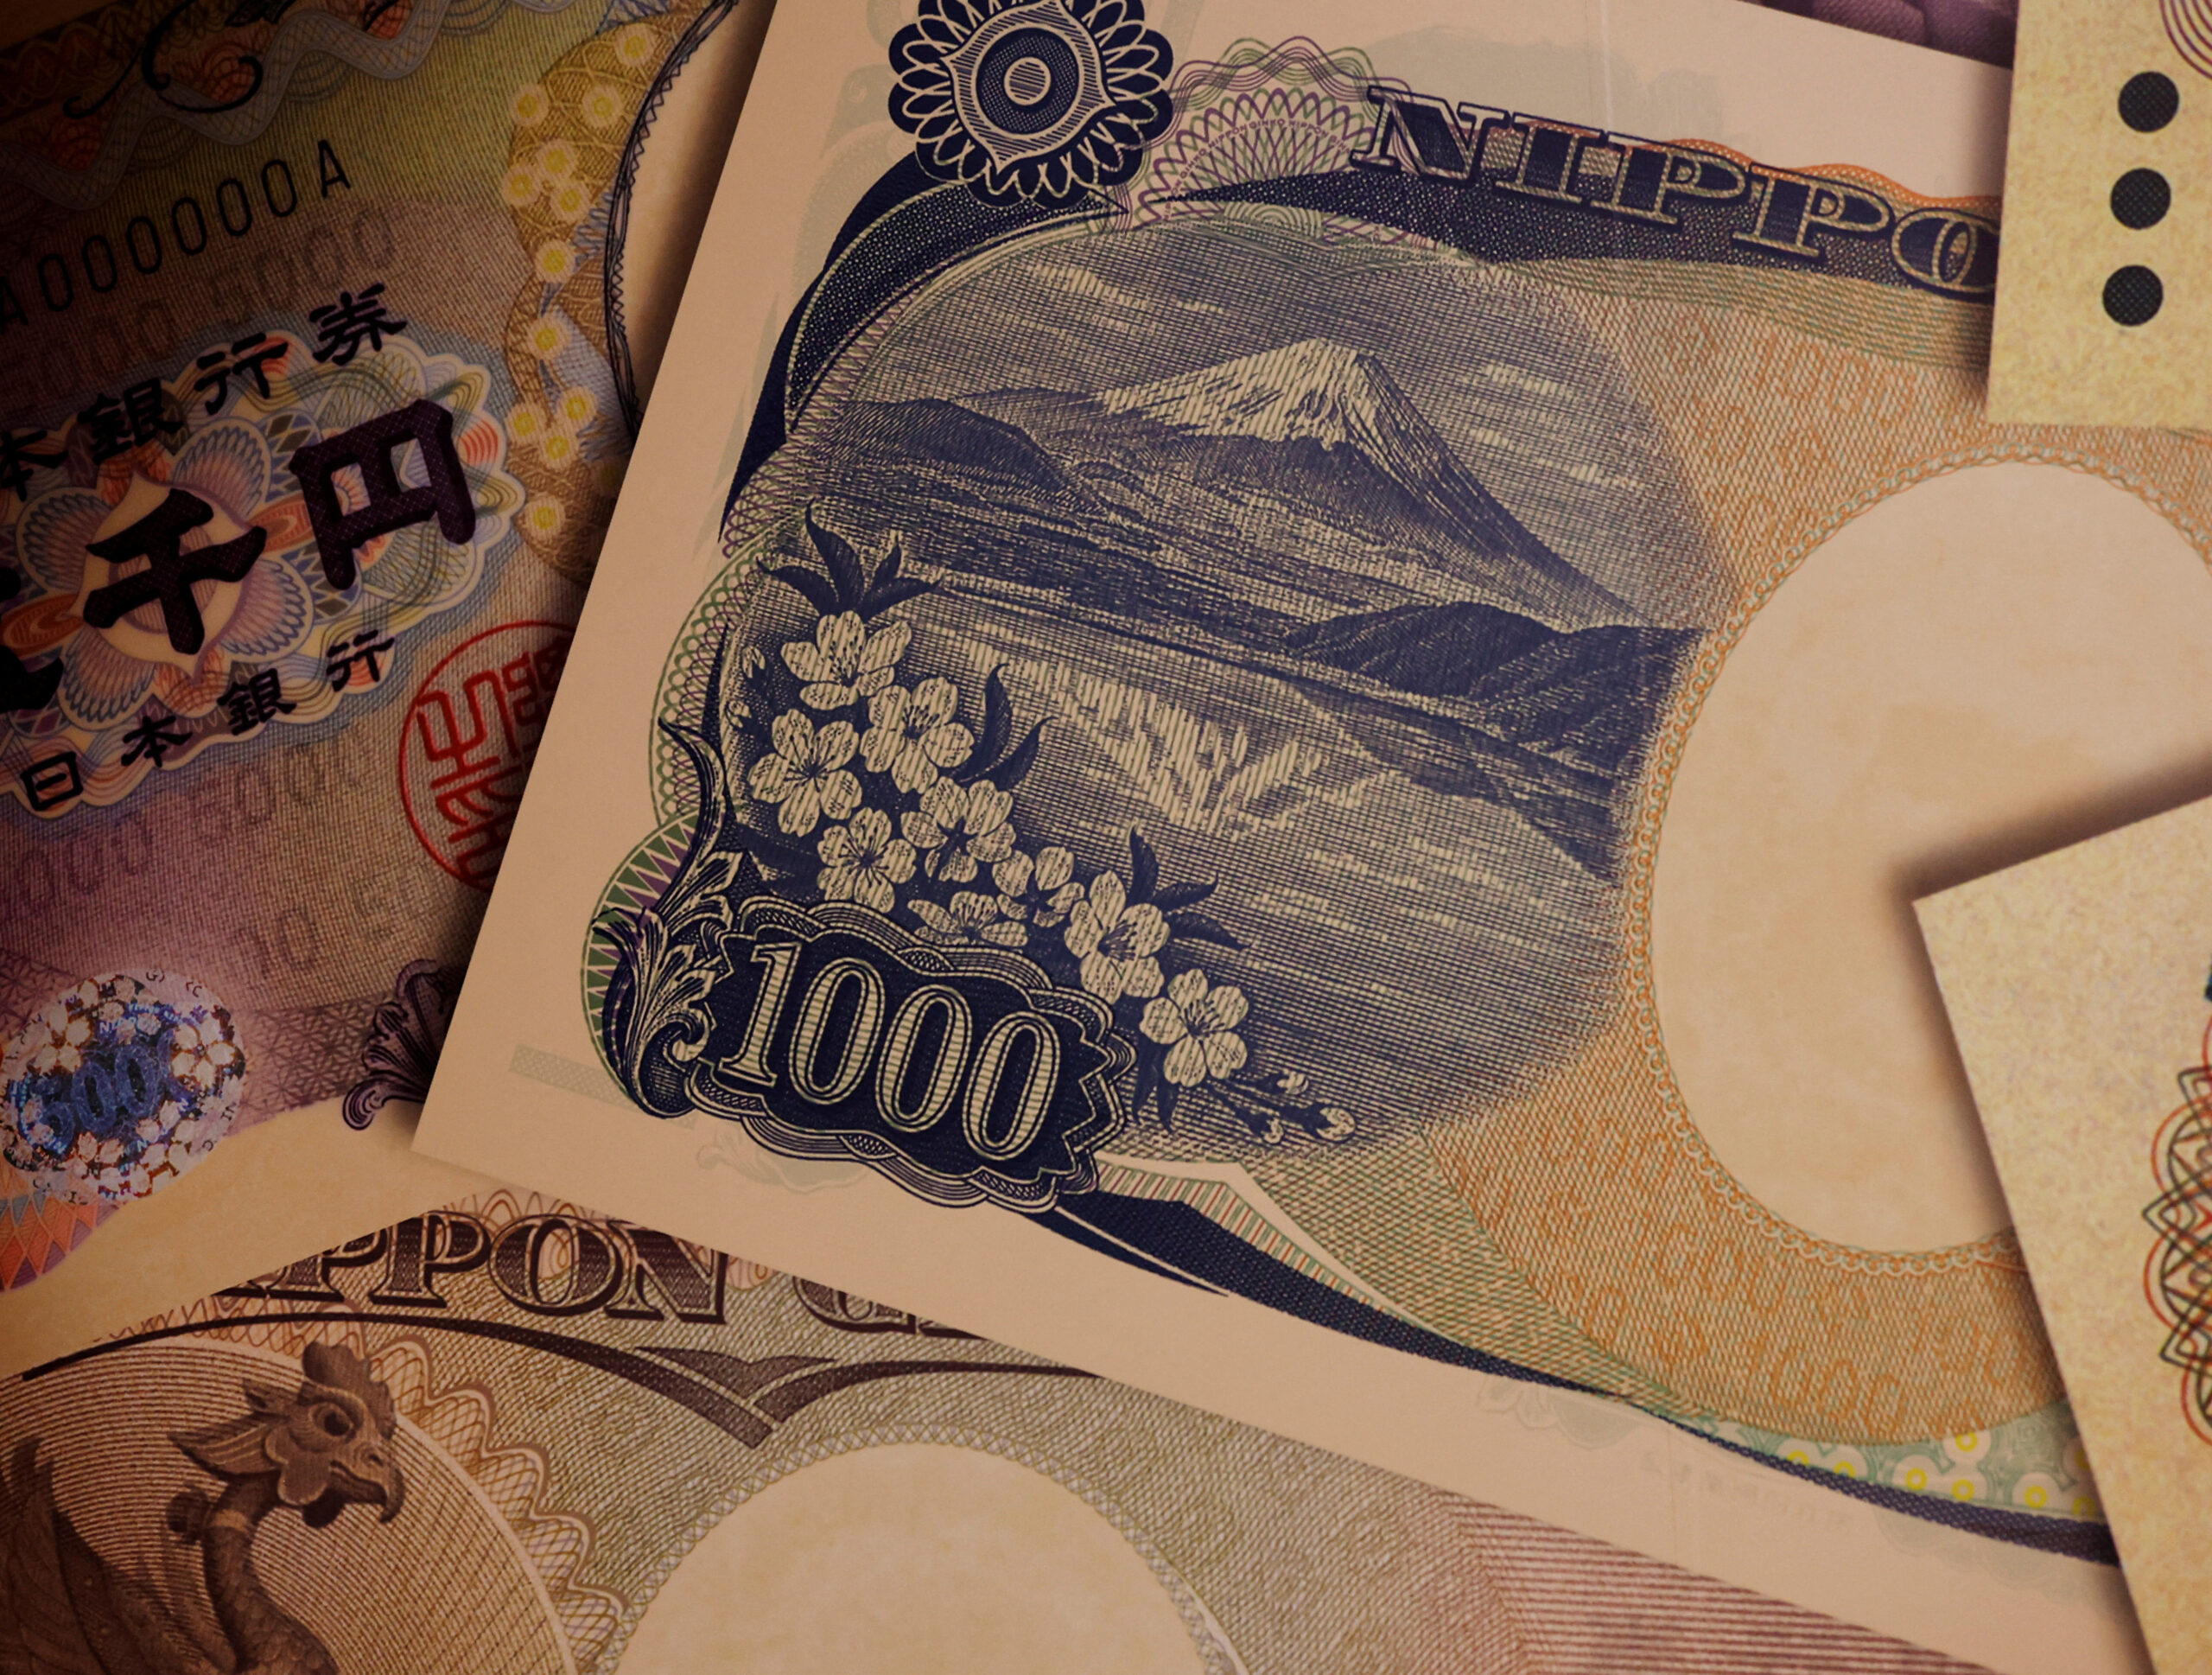 History of Japan’s intervention in currency markets